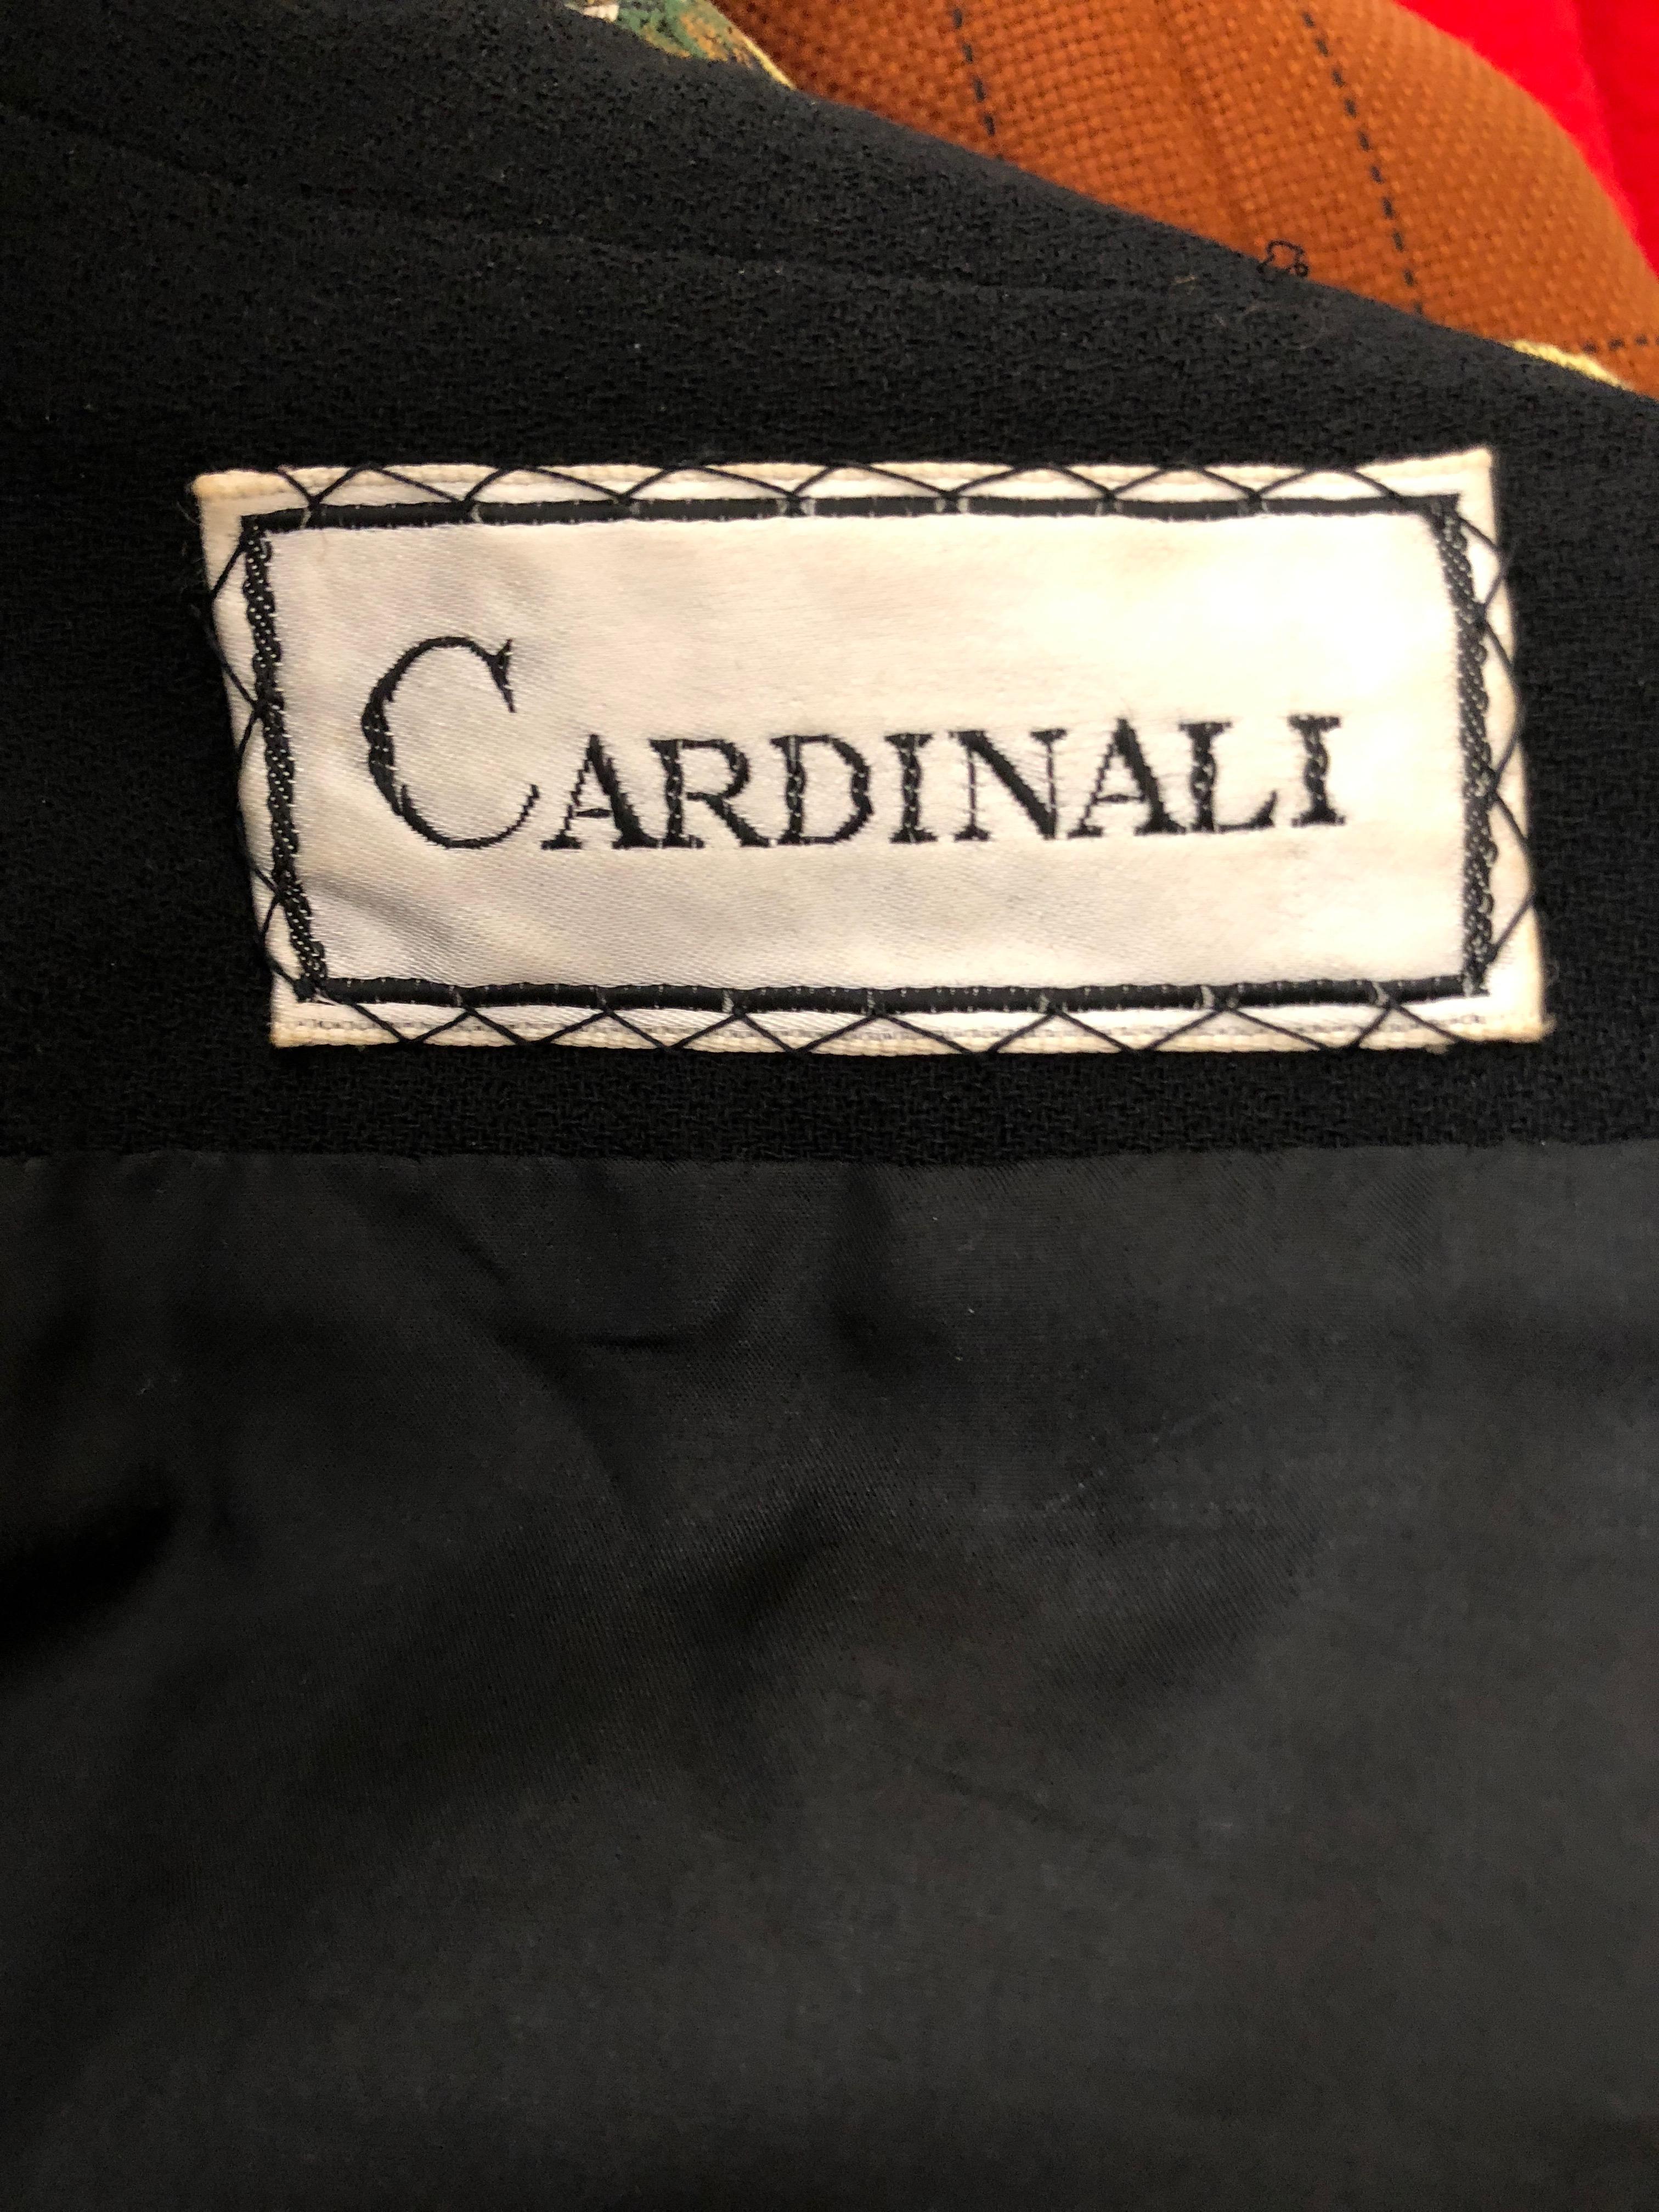 Cardinali Embroidered Black Cotton Skirt Suit with Midriff Baring Bra Fall 1971  For Sale 12